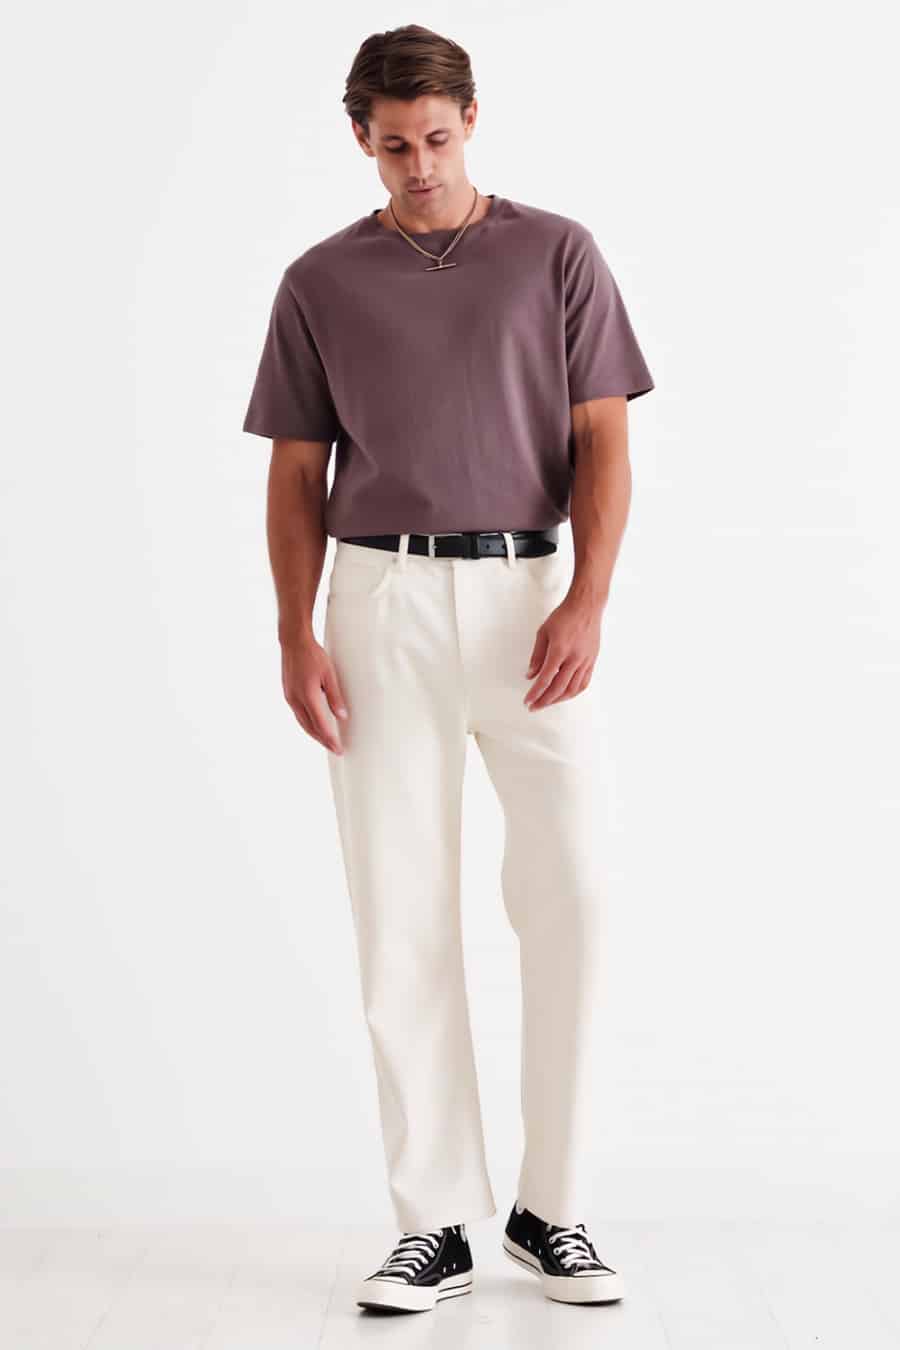 Men's relaxed fit white pants, tucked in T-shirt, black belt and black Converse high-tops outfit